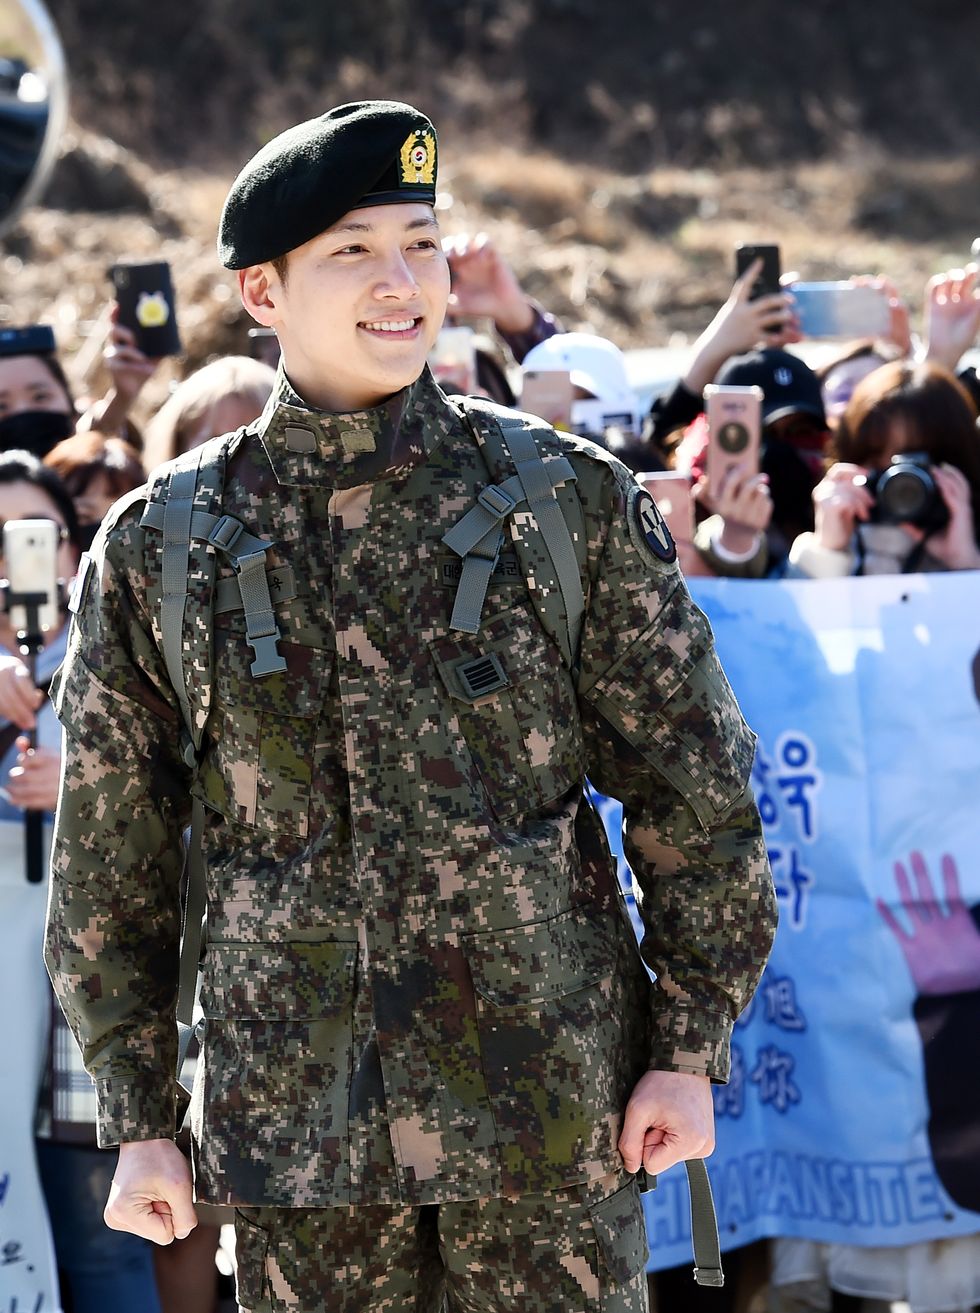 korean actor ji chang wook discharged from military at the 3rd infantry division on april 27, 2019 in gangwon, south korea 2019 04 27